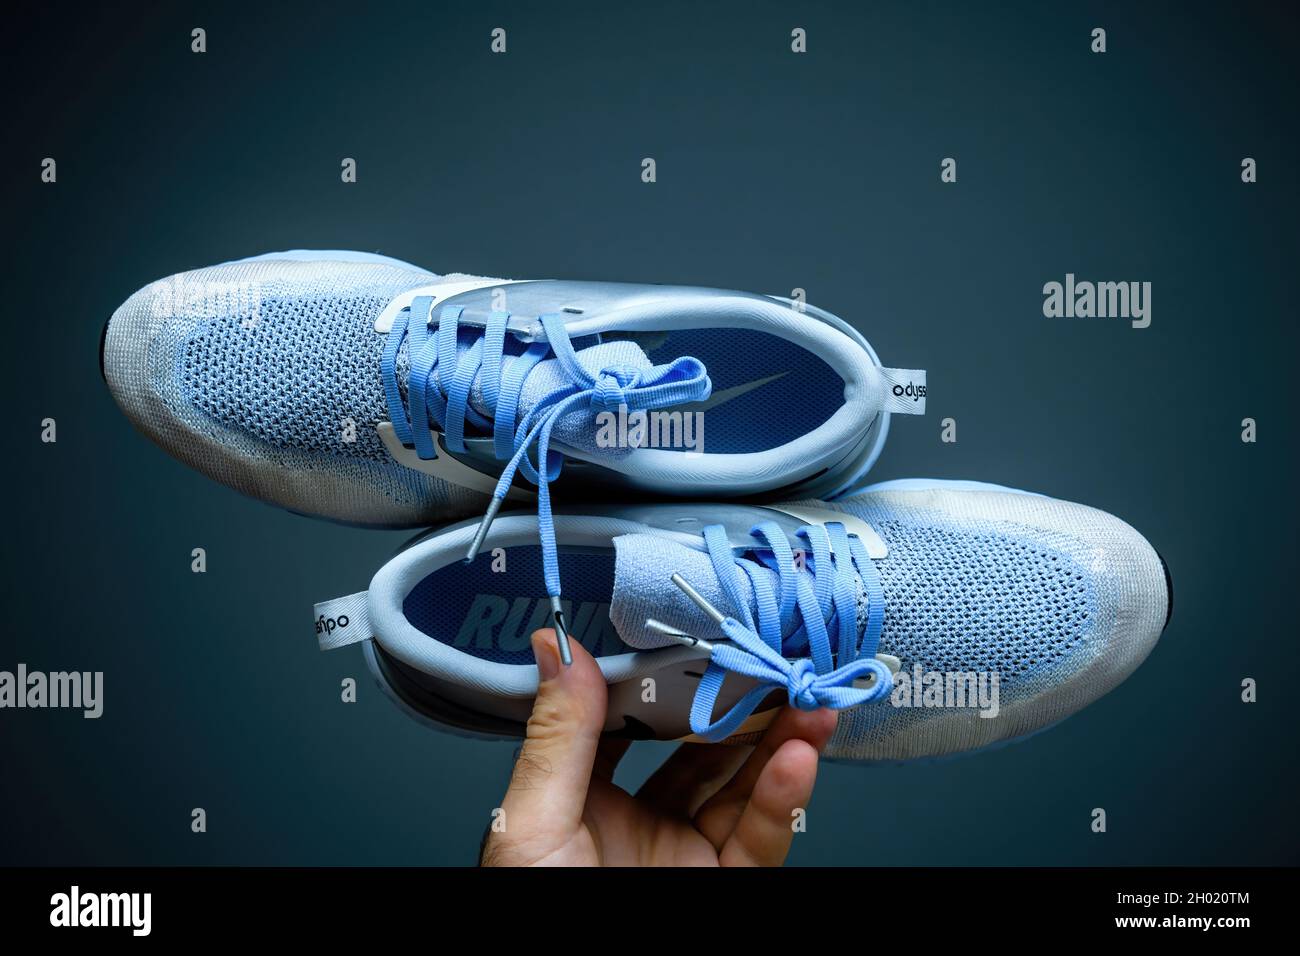 Pov male hand holding new pair of luxury running shoes Nike Zoom react  Stock Photo - Alamy